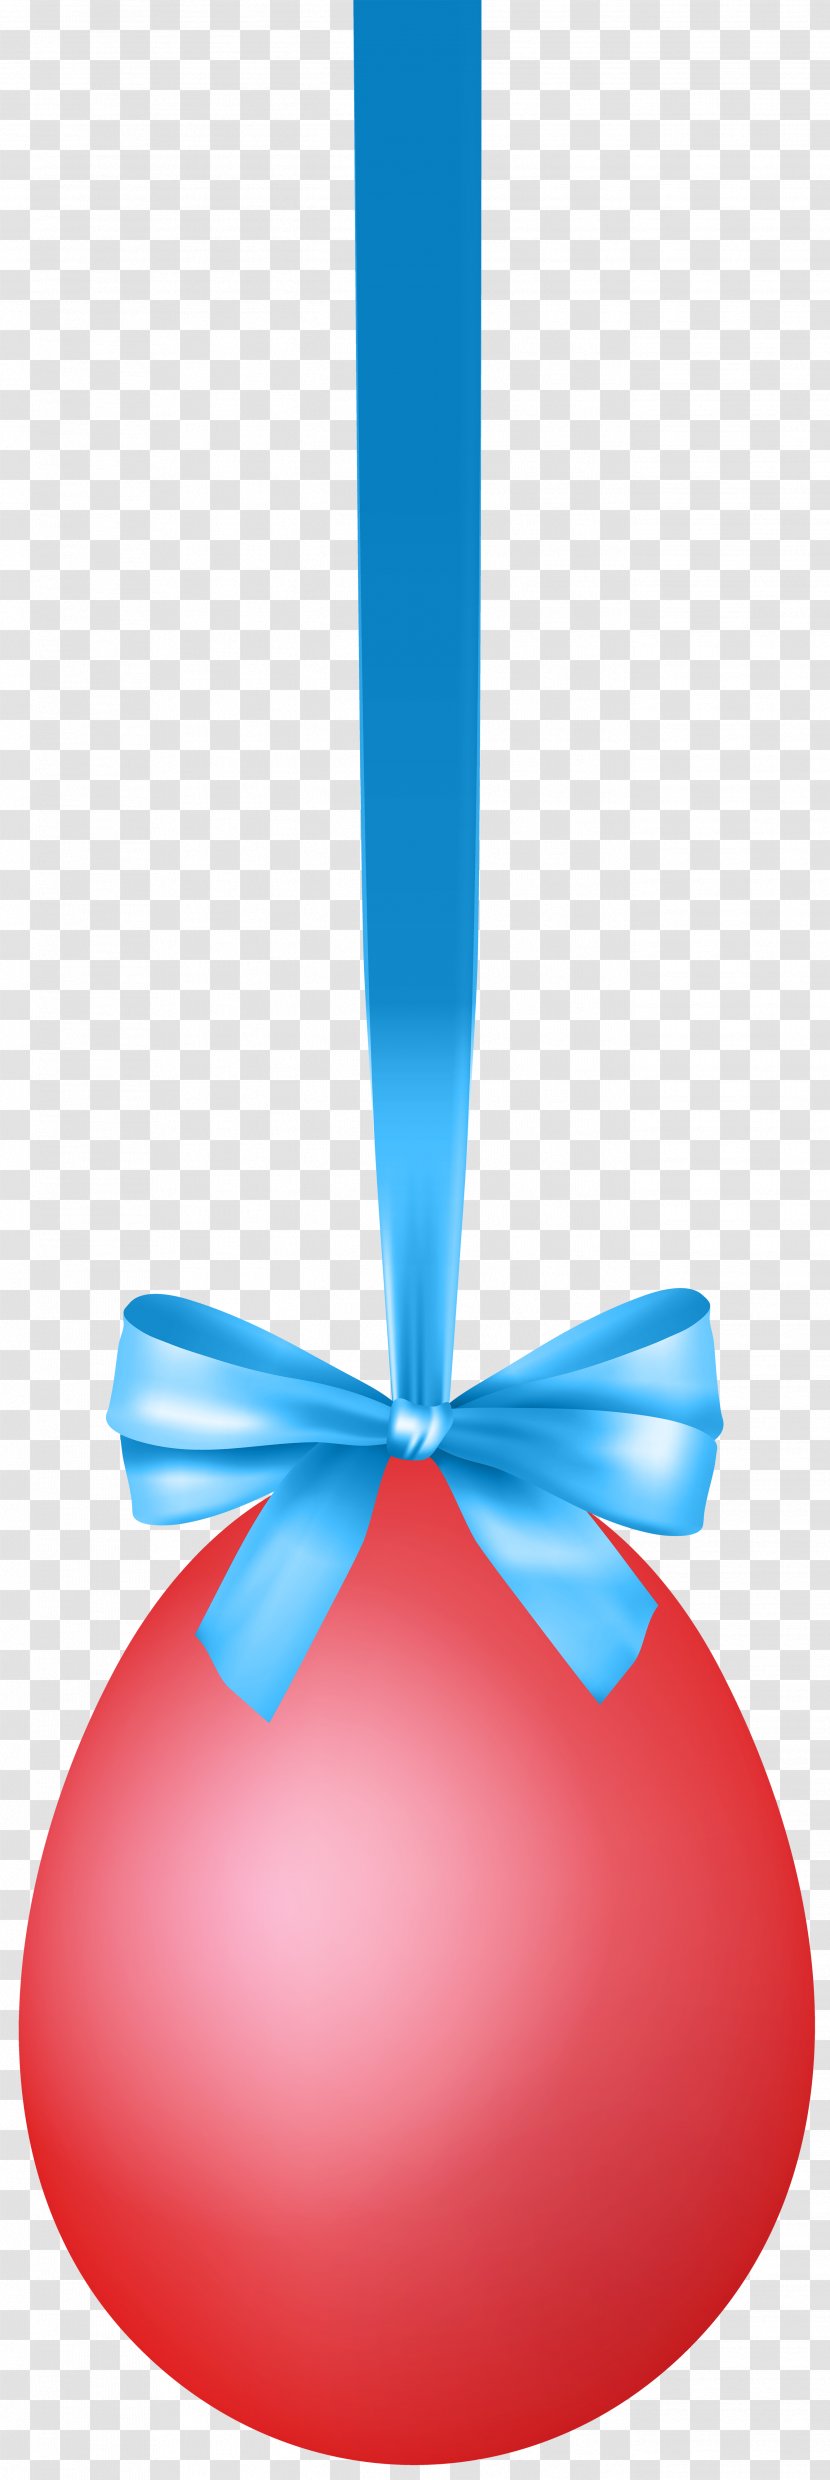 Red Sphere - Microsoft Azure - Hanging Easter Egg With Bow Transparent Clip Art Image Transparent PNG